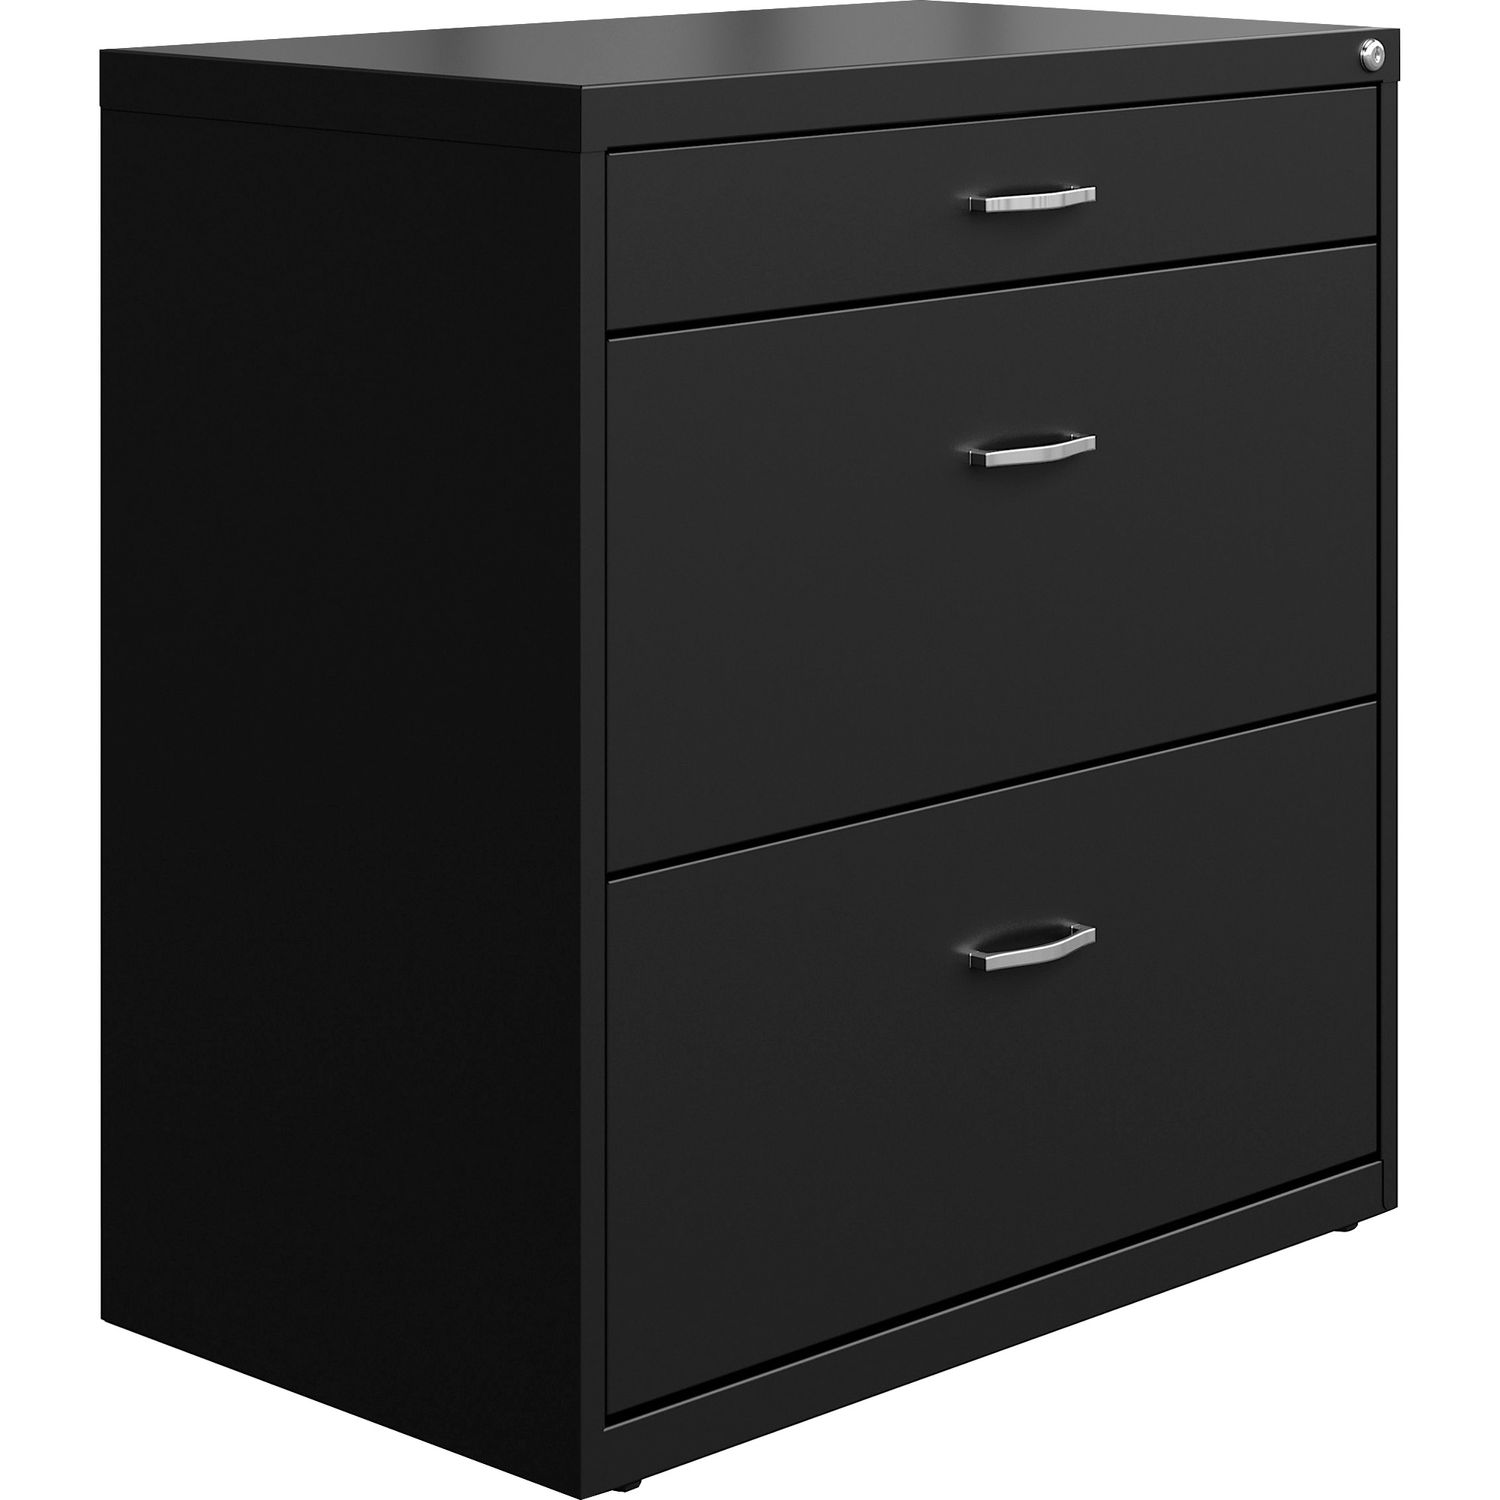 SOHO Lateral File 30" x 17.6" x 31.8", 2 x Drawer(s) for File, Letter, Lateral, Versatile, Storage Drawer, Hanging Rail, Interlocking, Ball-bearing Suspension, Removable Lock, Durable, Black, Steel